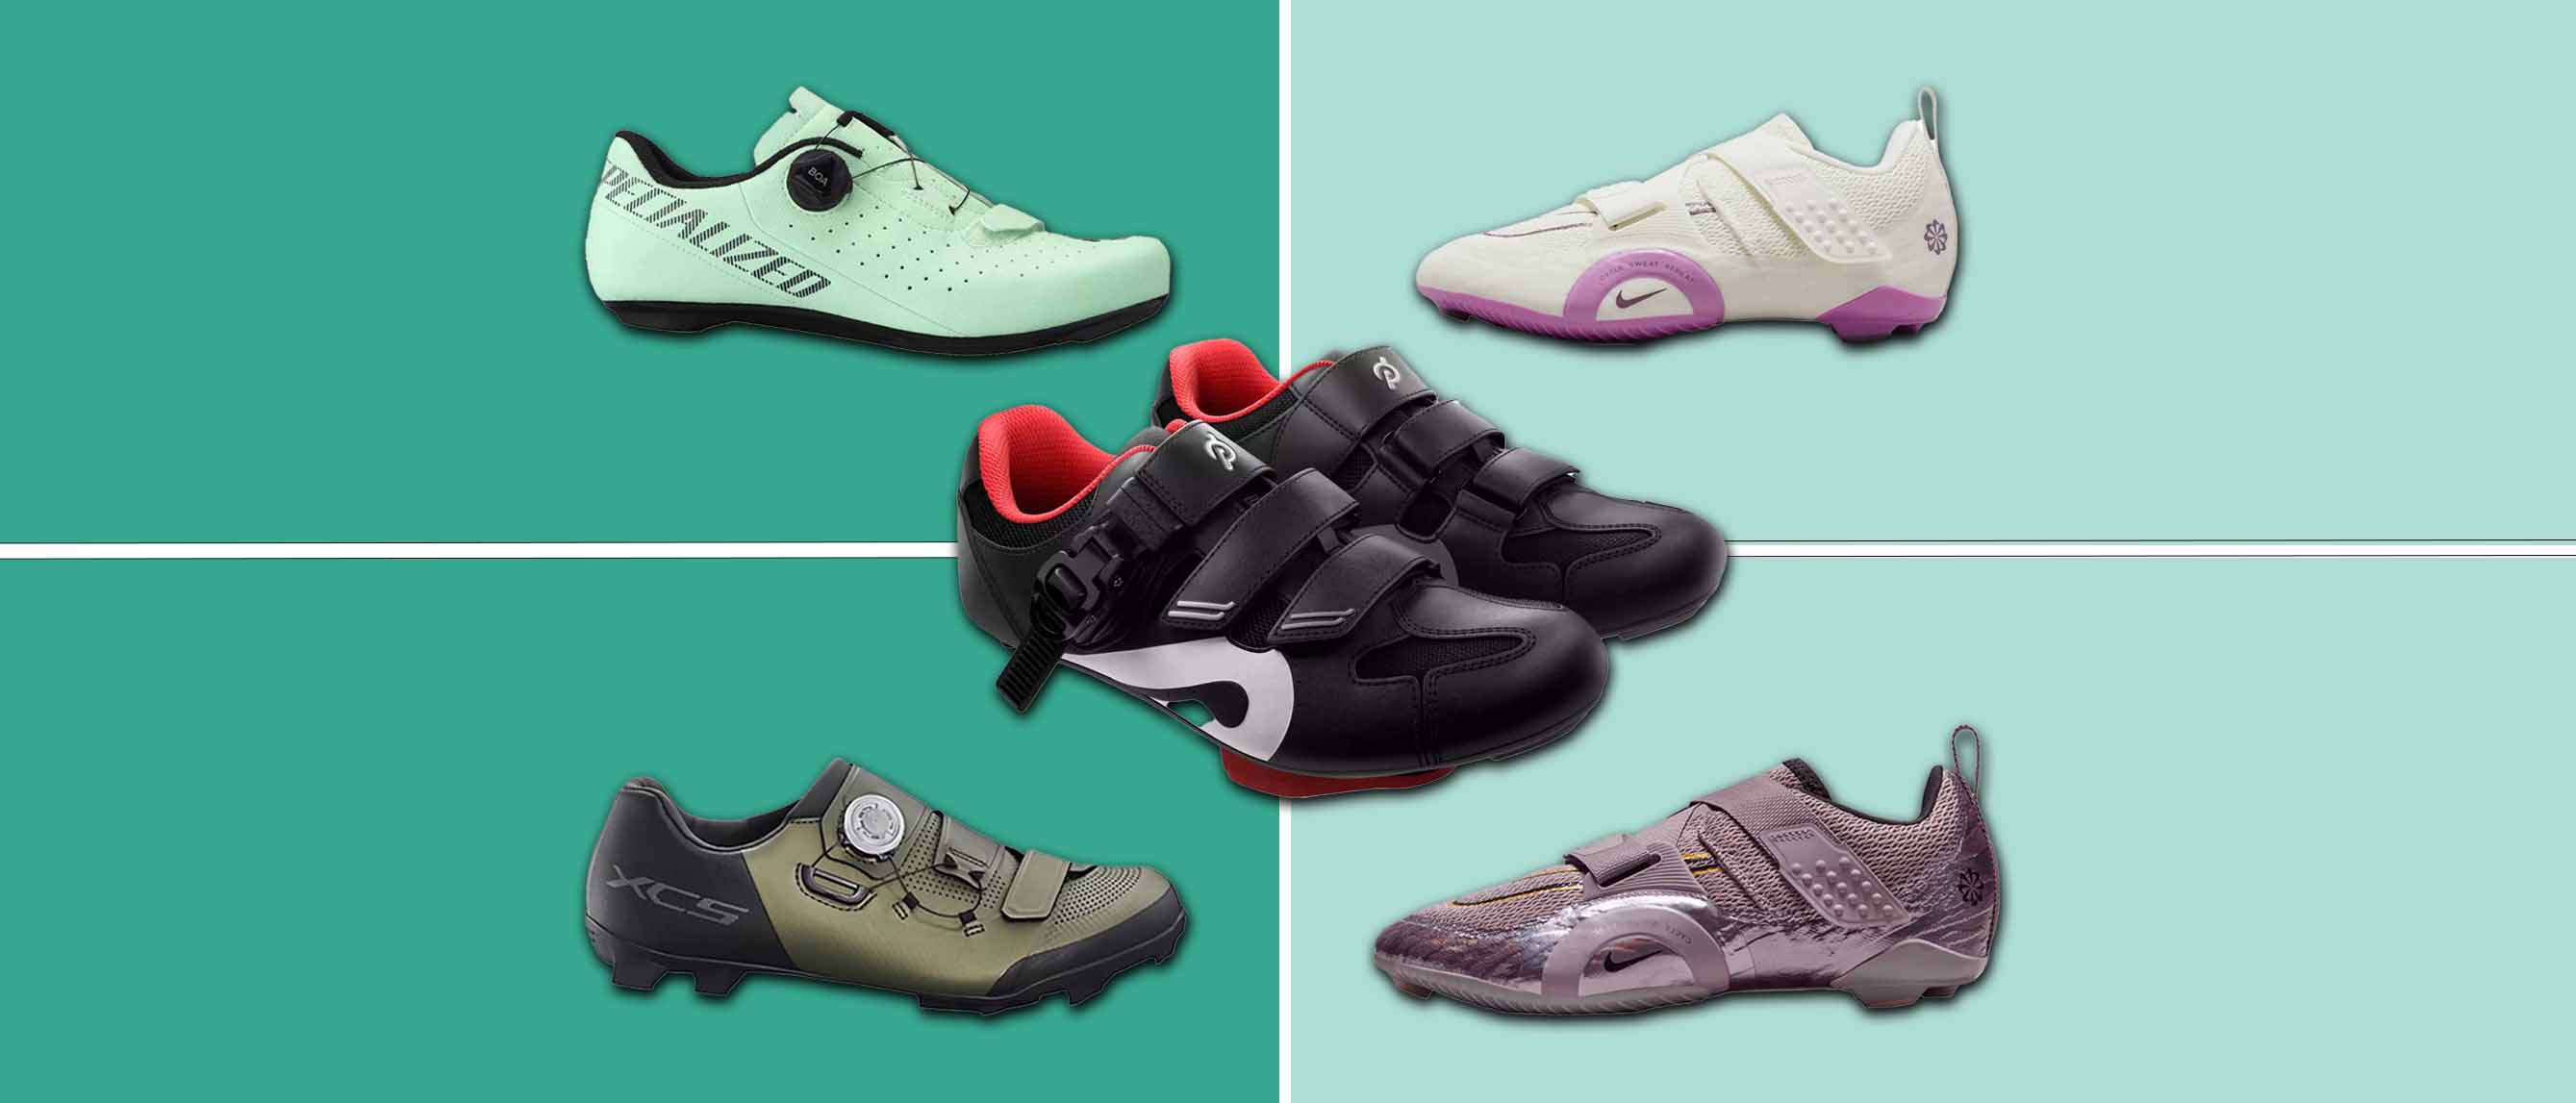 five of the best cycling shoes for men and women from Backcountry, Nike and Dick's Sporting Goods